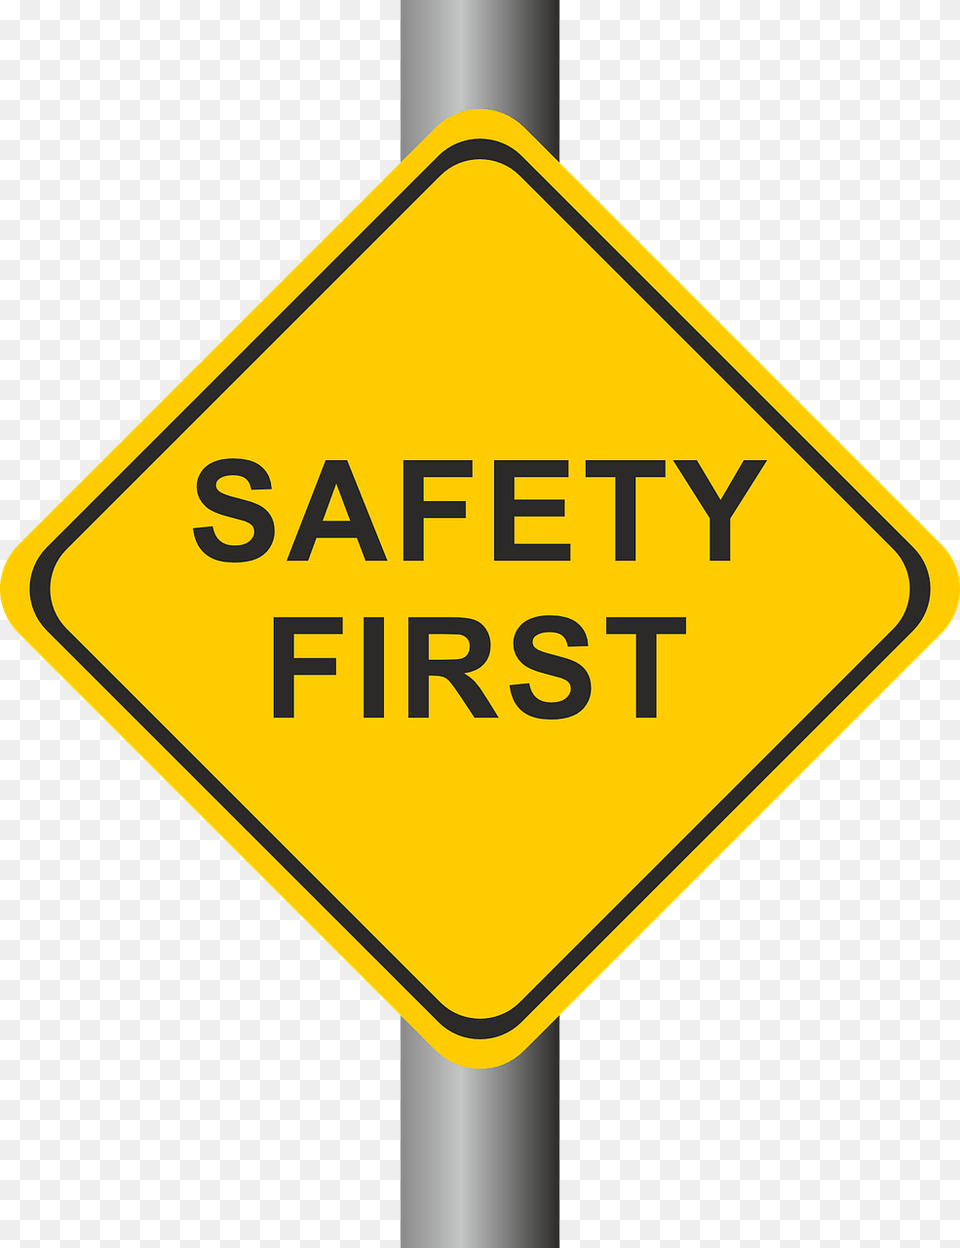 Just Like With Other Sports Safety Should Play, Sign, Symbol, Road Sign Png Image